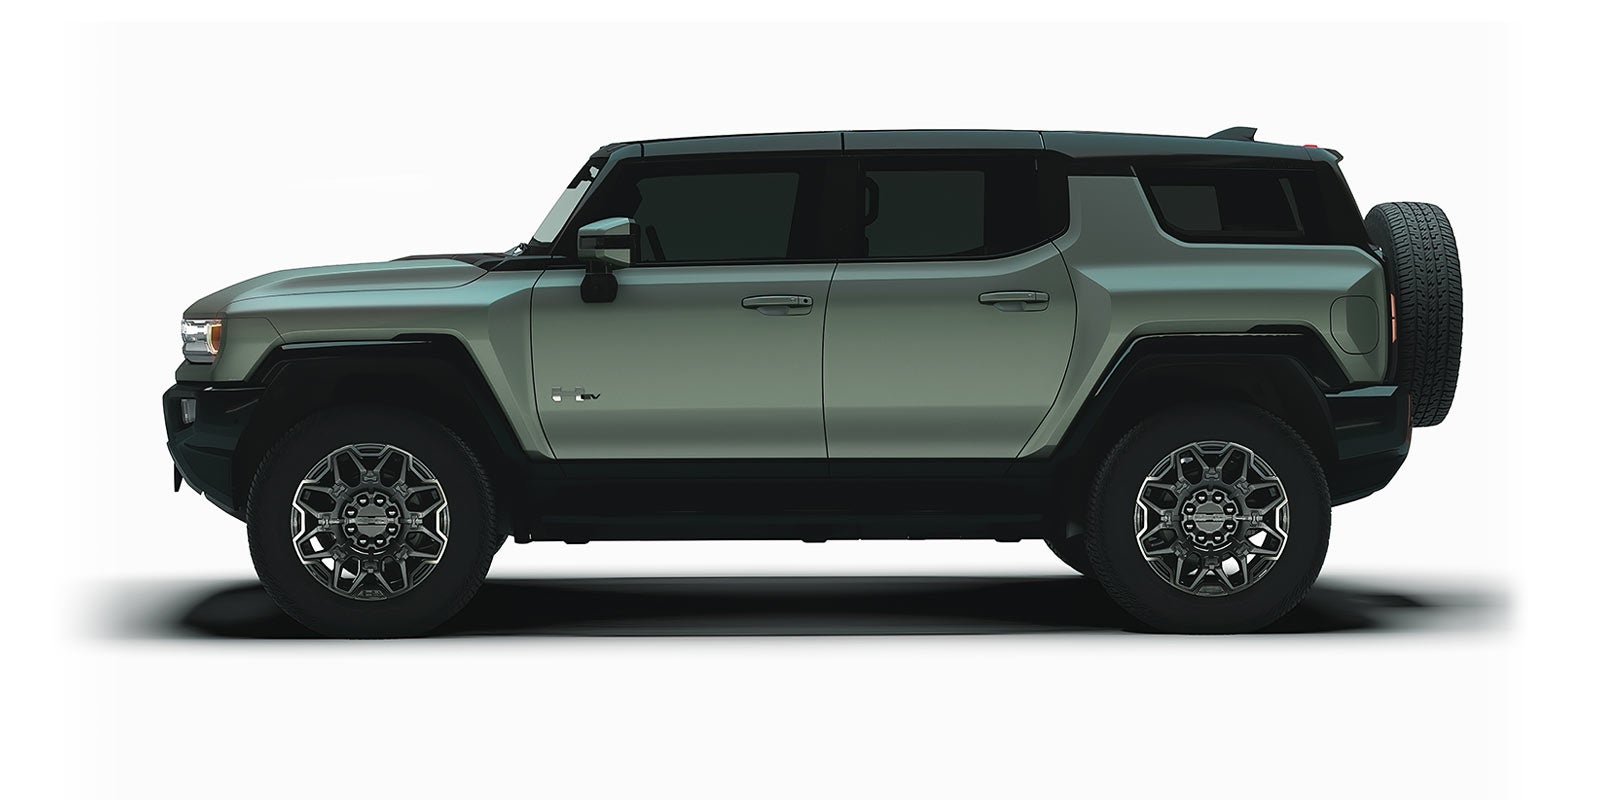 hummer ev pickup and hummer ev | Andy Mohr Buick GMC in Fishers IN